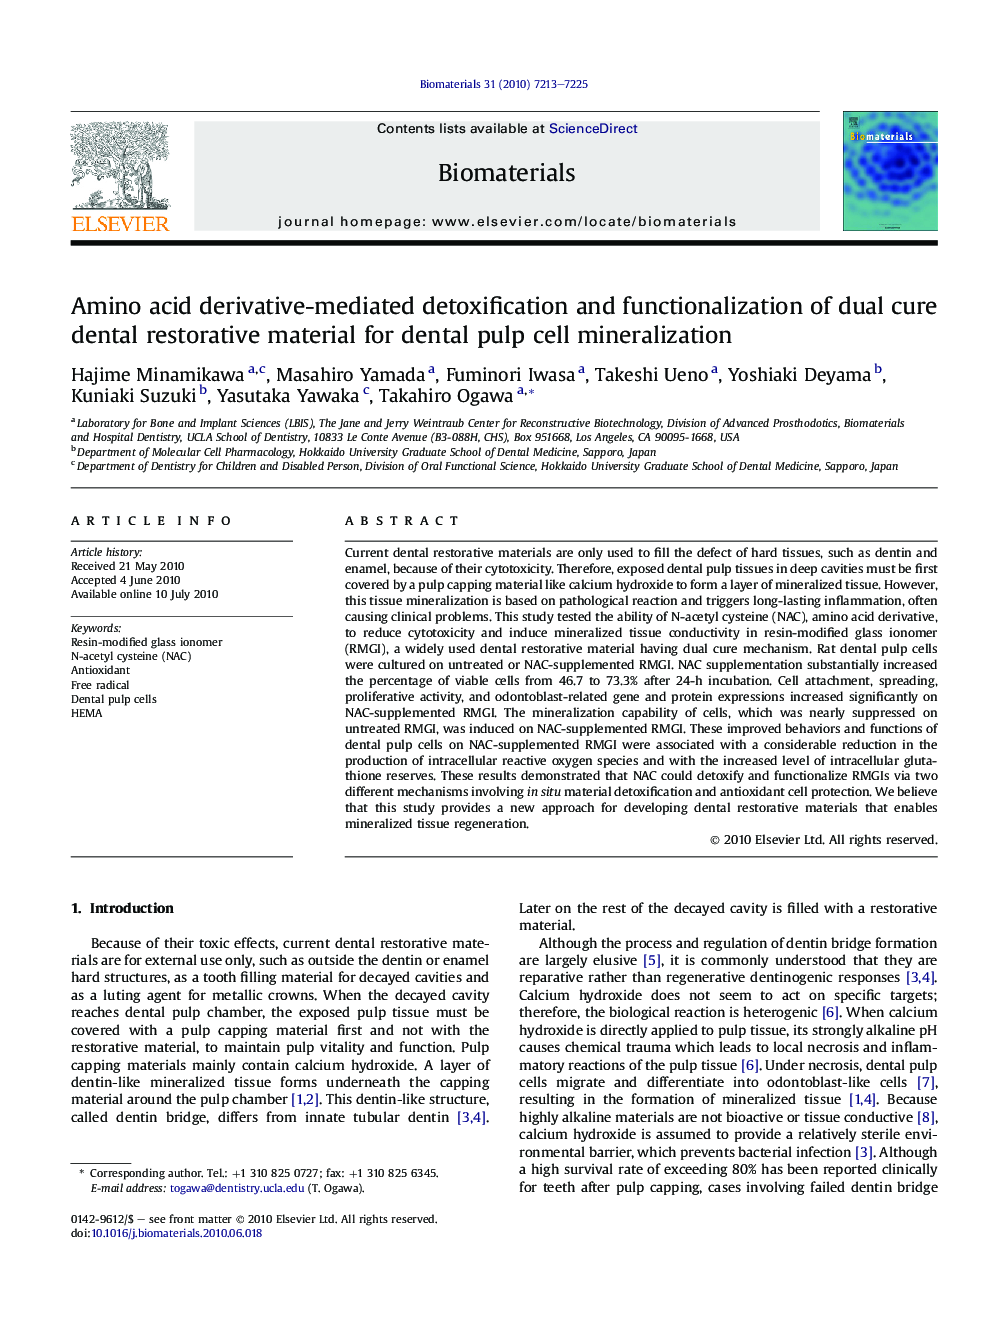 Amino acid derivative-mediated detoxification and functionalization of dual cure dental restorative material for dental pulp cell mineralization